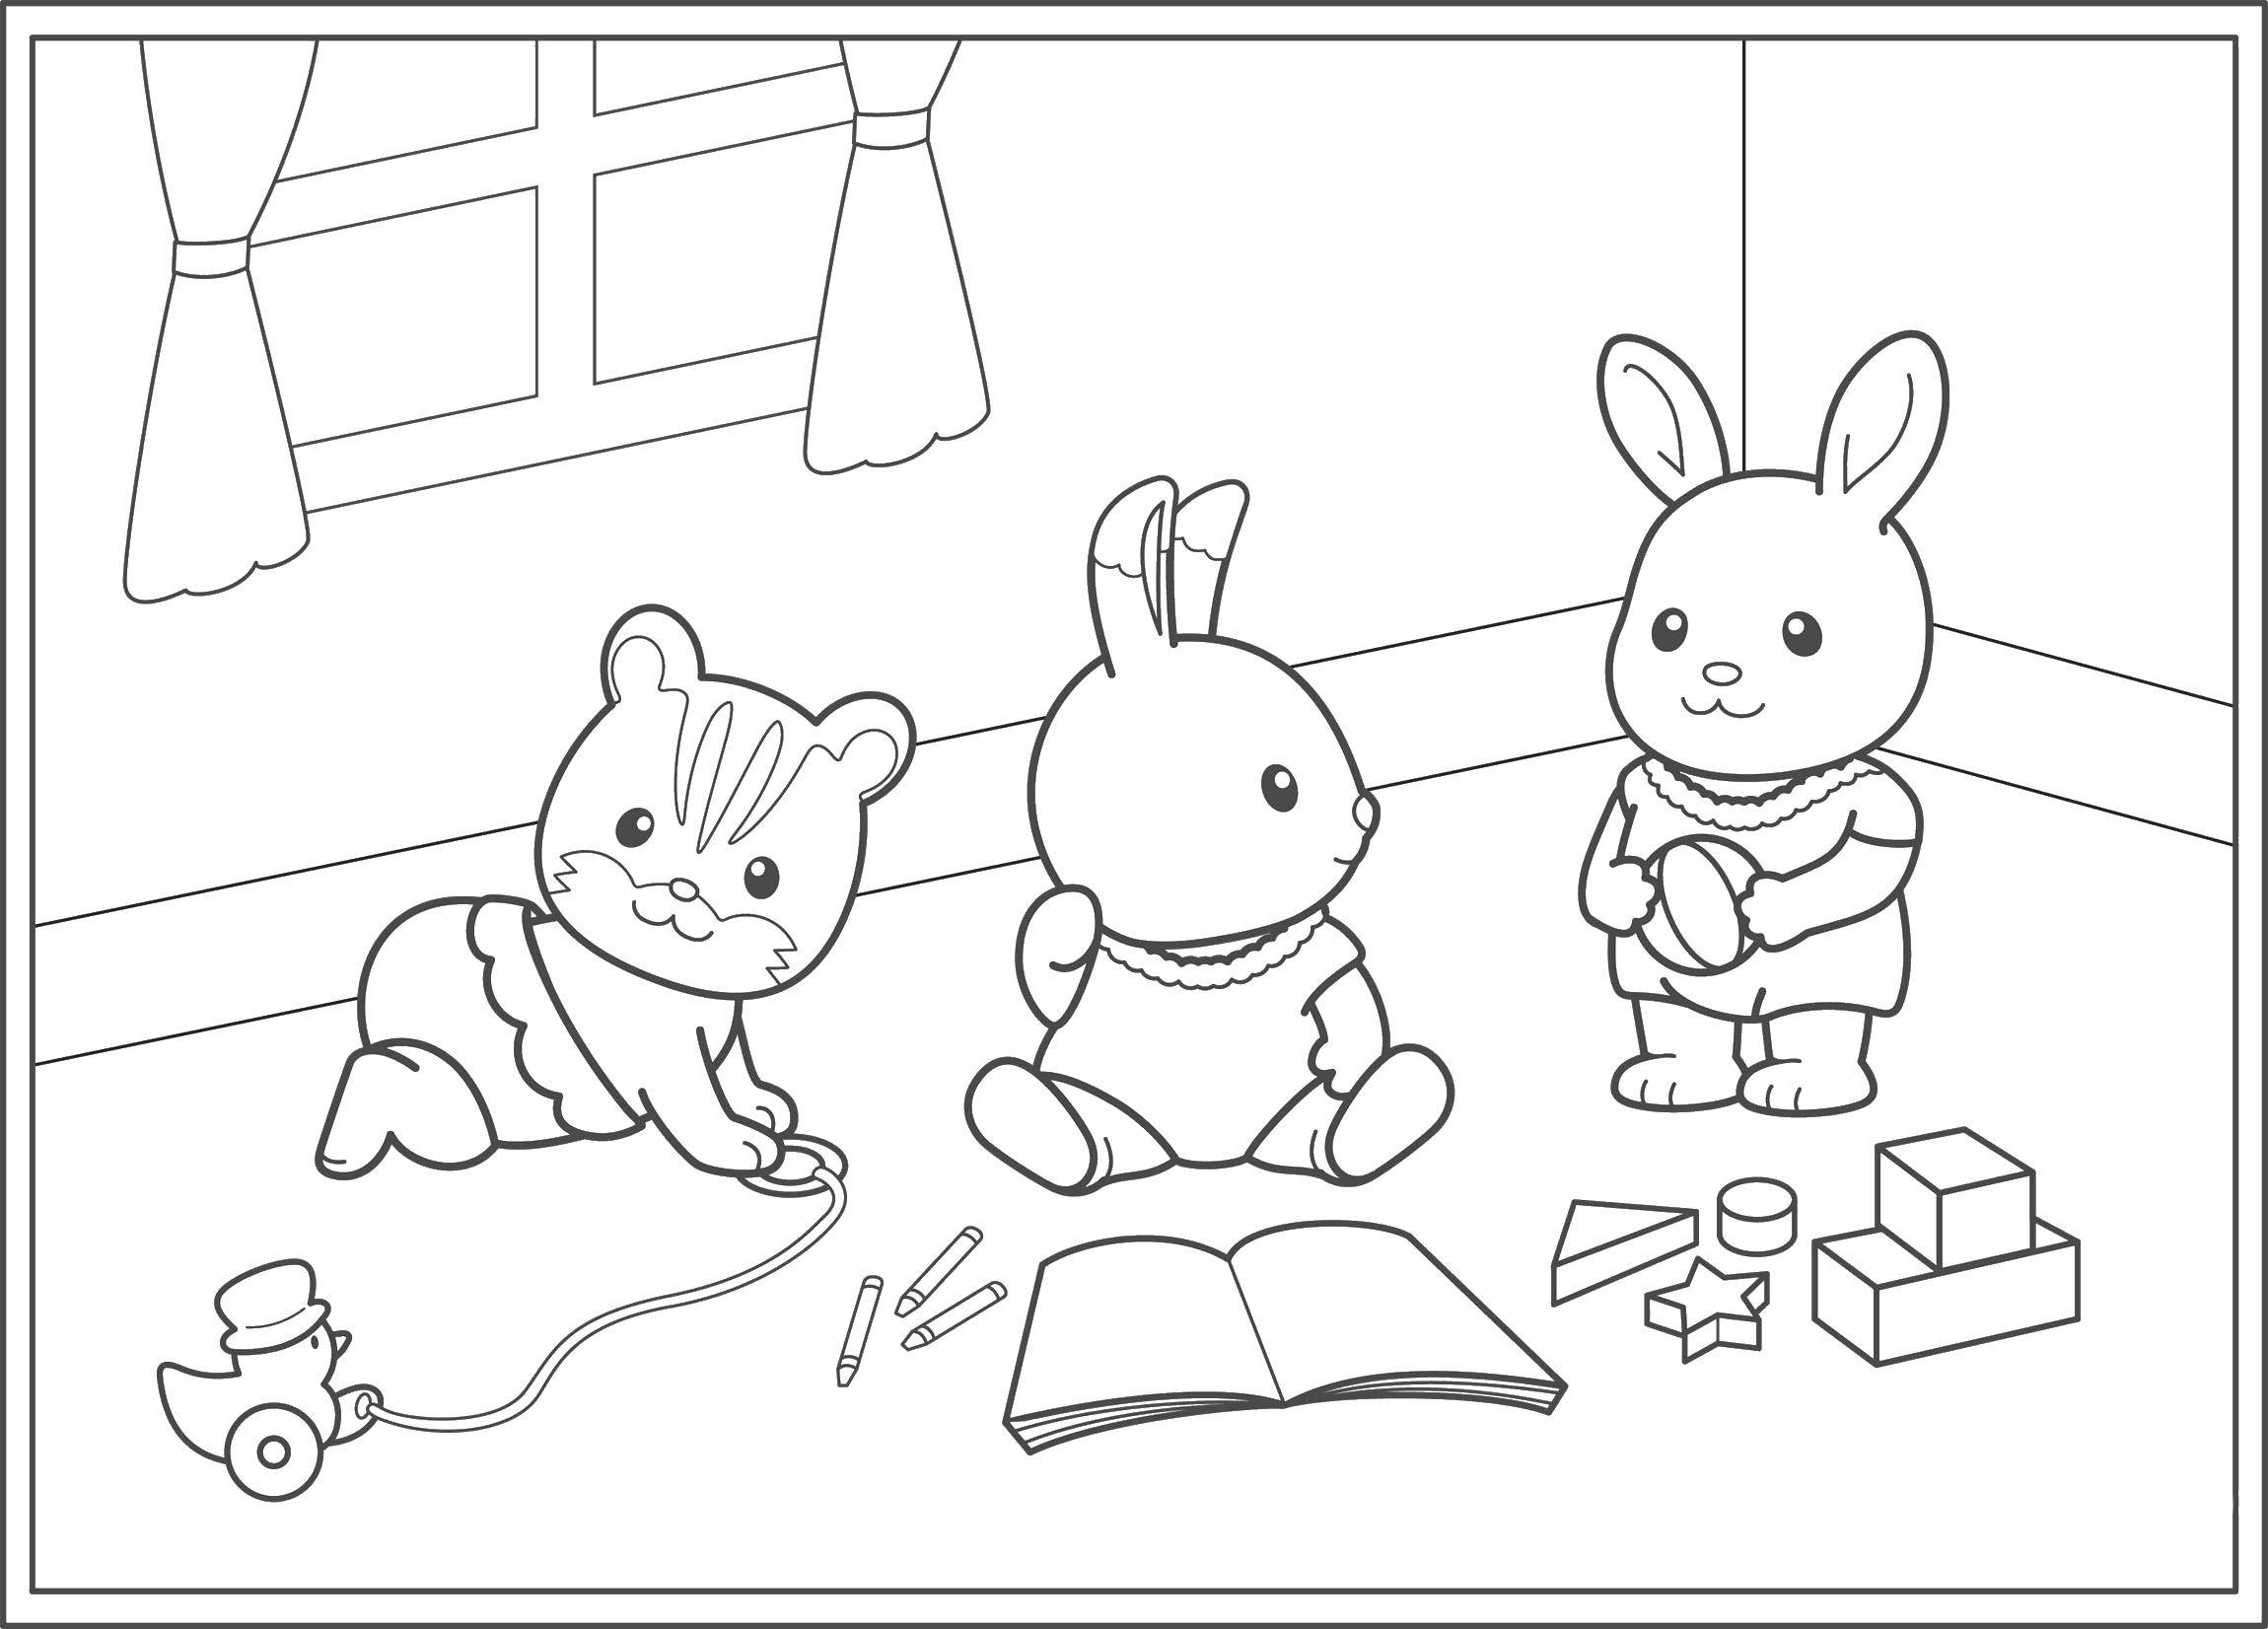 Coloring Animal games. Category family animals. Tags:  little animals.